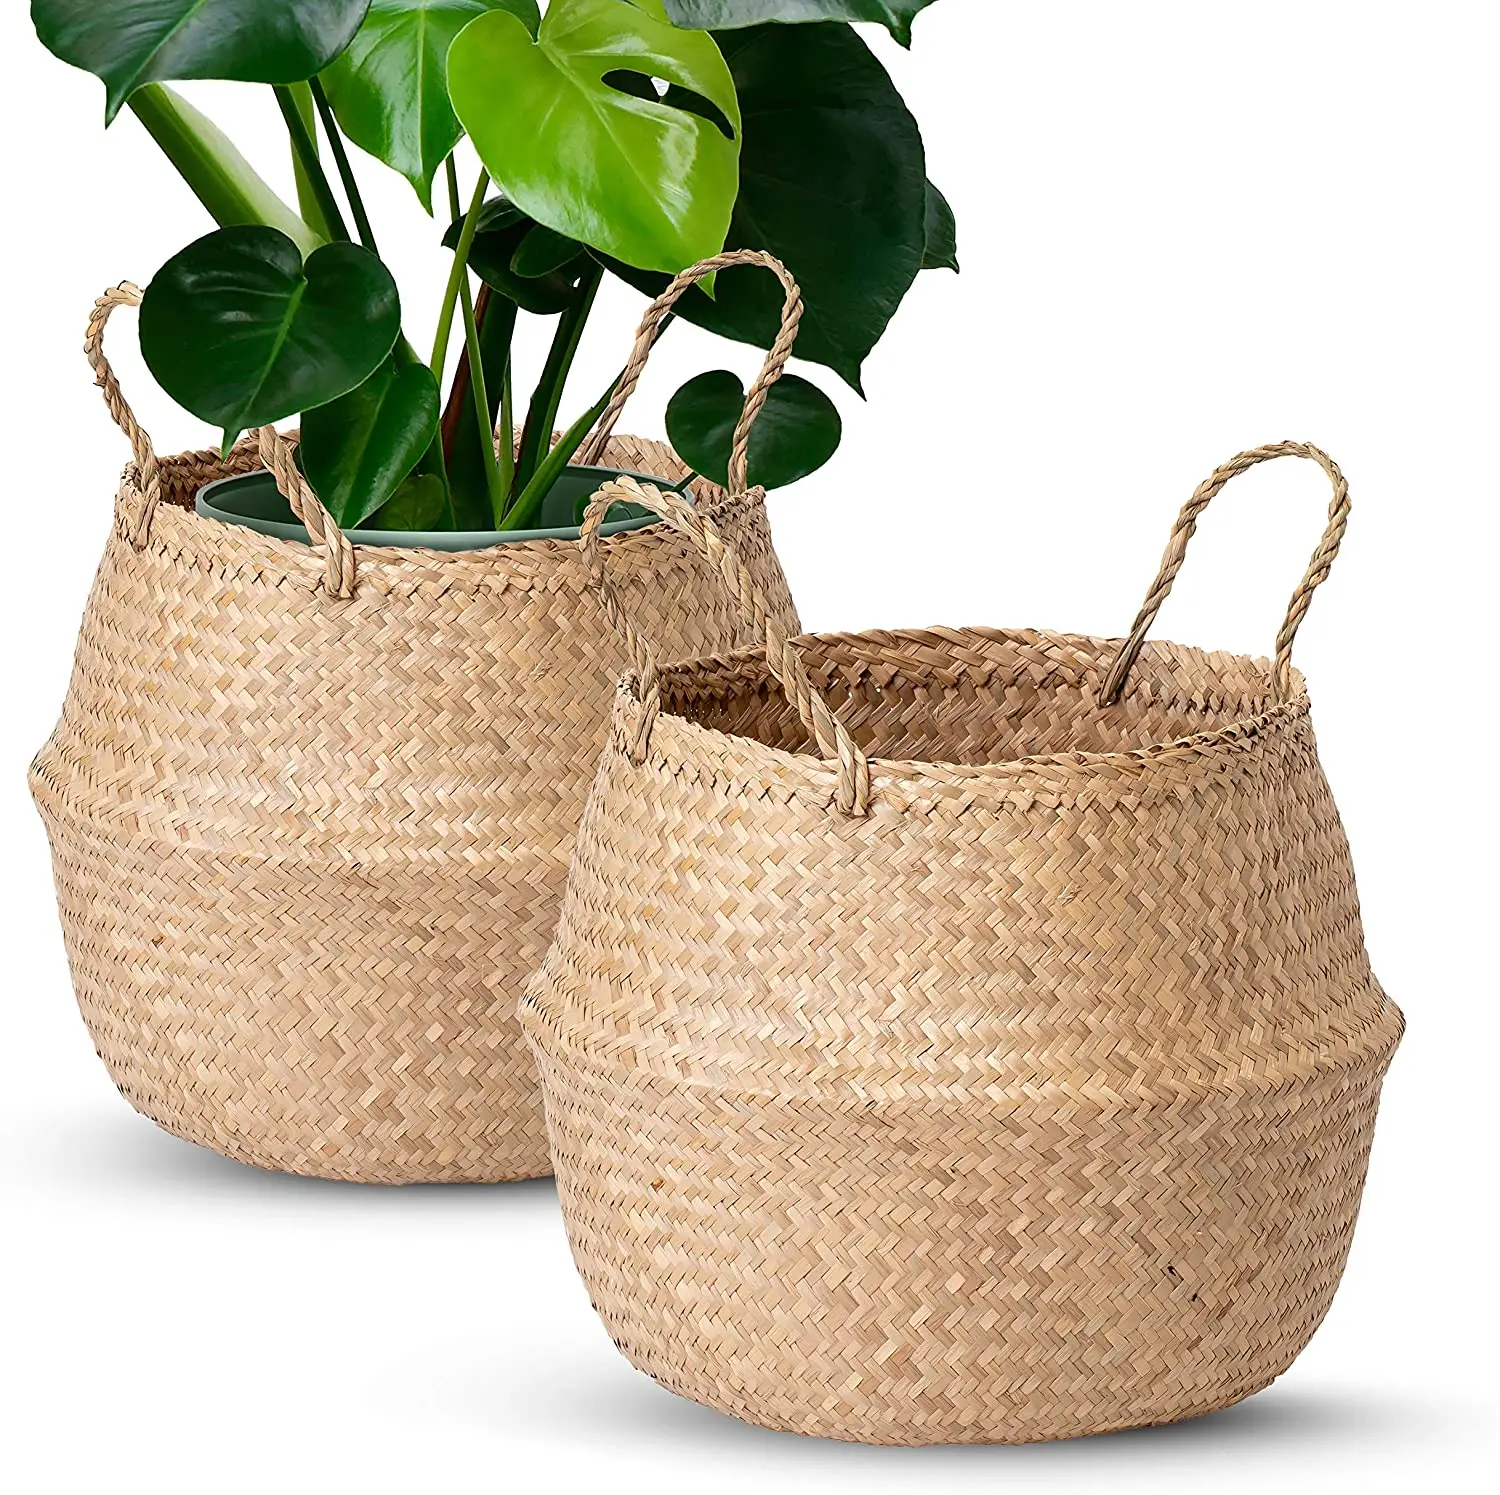 Beach or Picnic Use Belle Vous Small Natural Woven Seagrass Belly Basket with Handles Decorative Bag for Living Room Indoor Plant Pot Storage Bag for Laundry & Toys Bathroom & Bedroom 